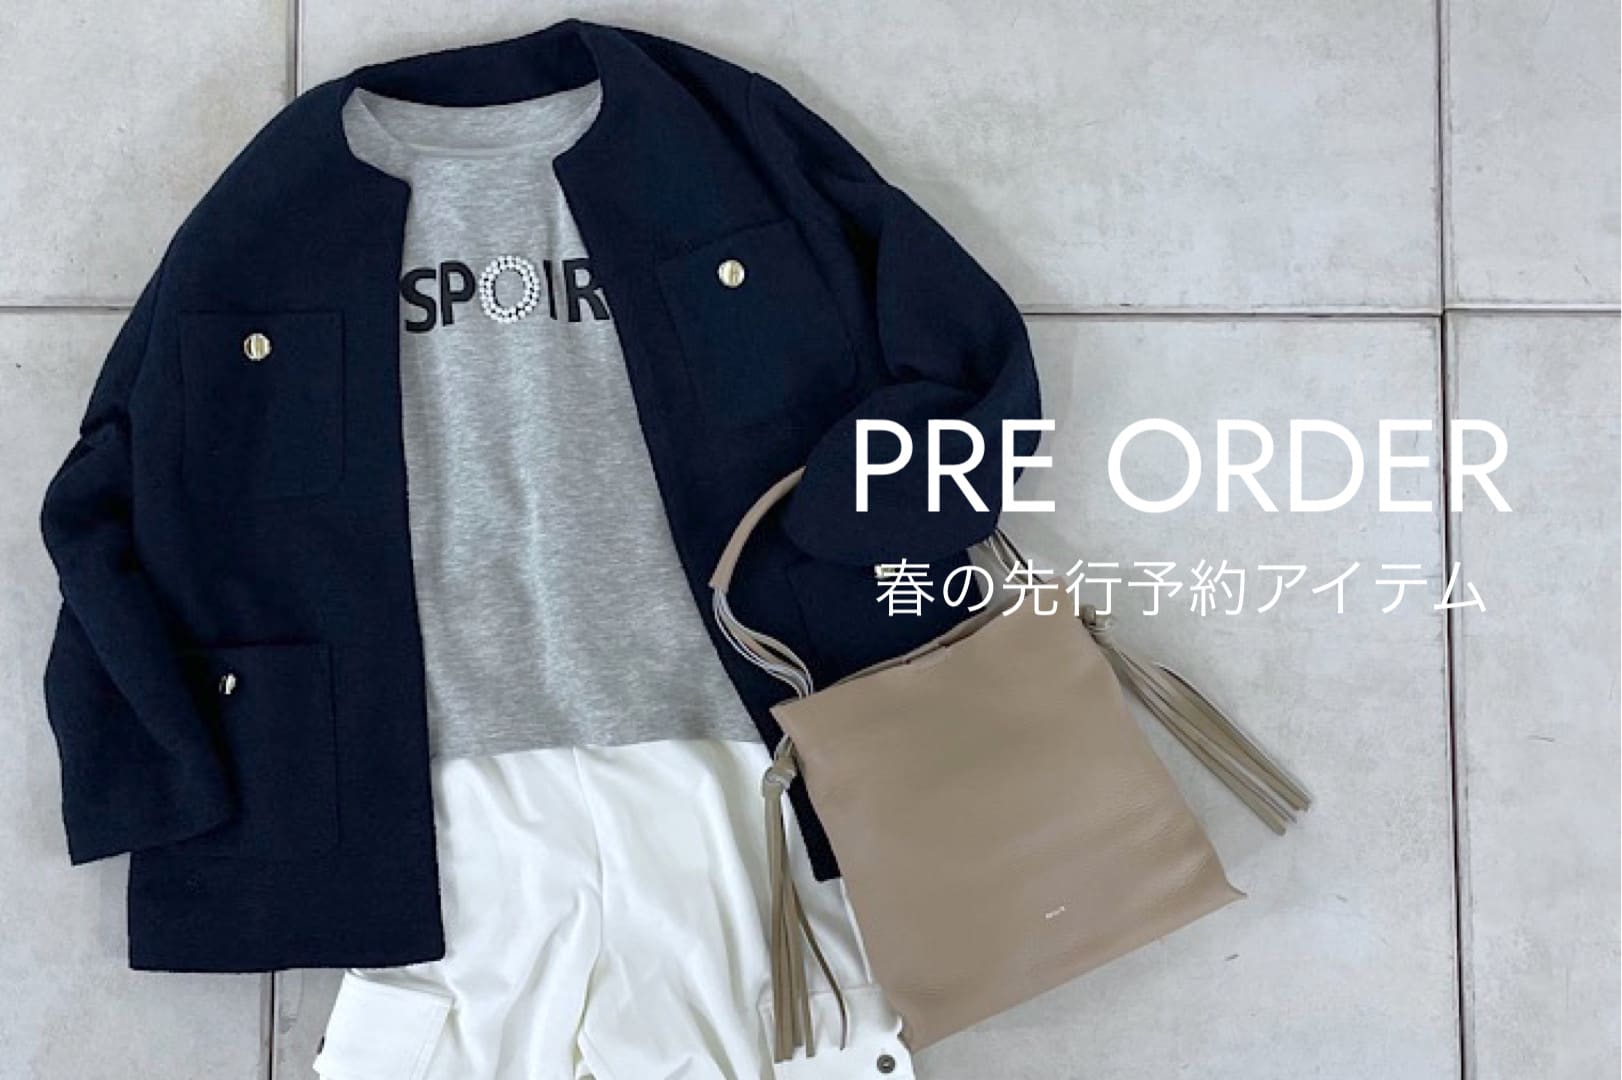 Pal collection 【PRE ORDER】NEW SPRING ITEM